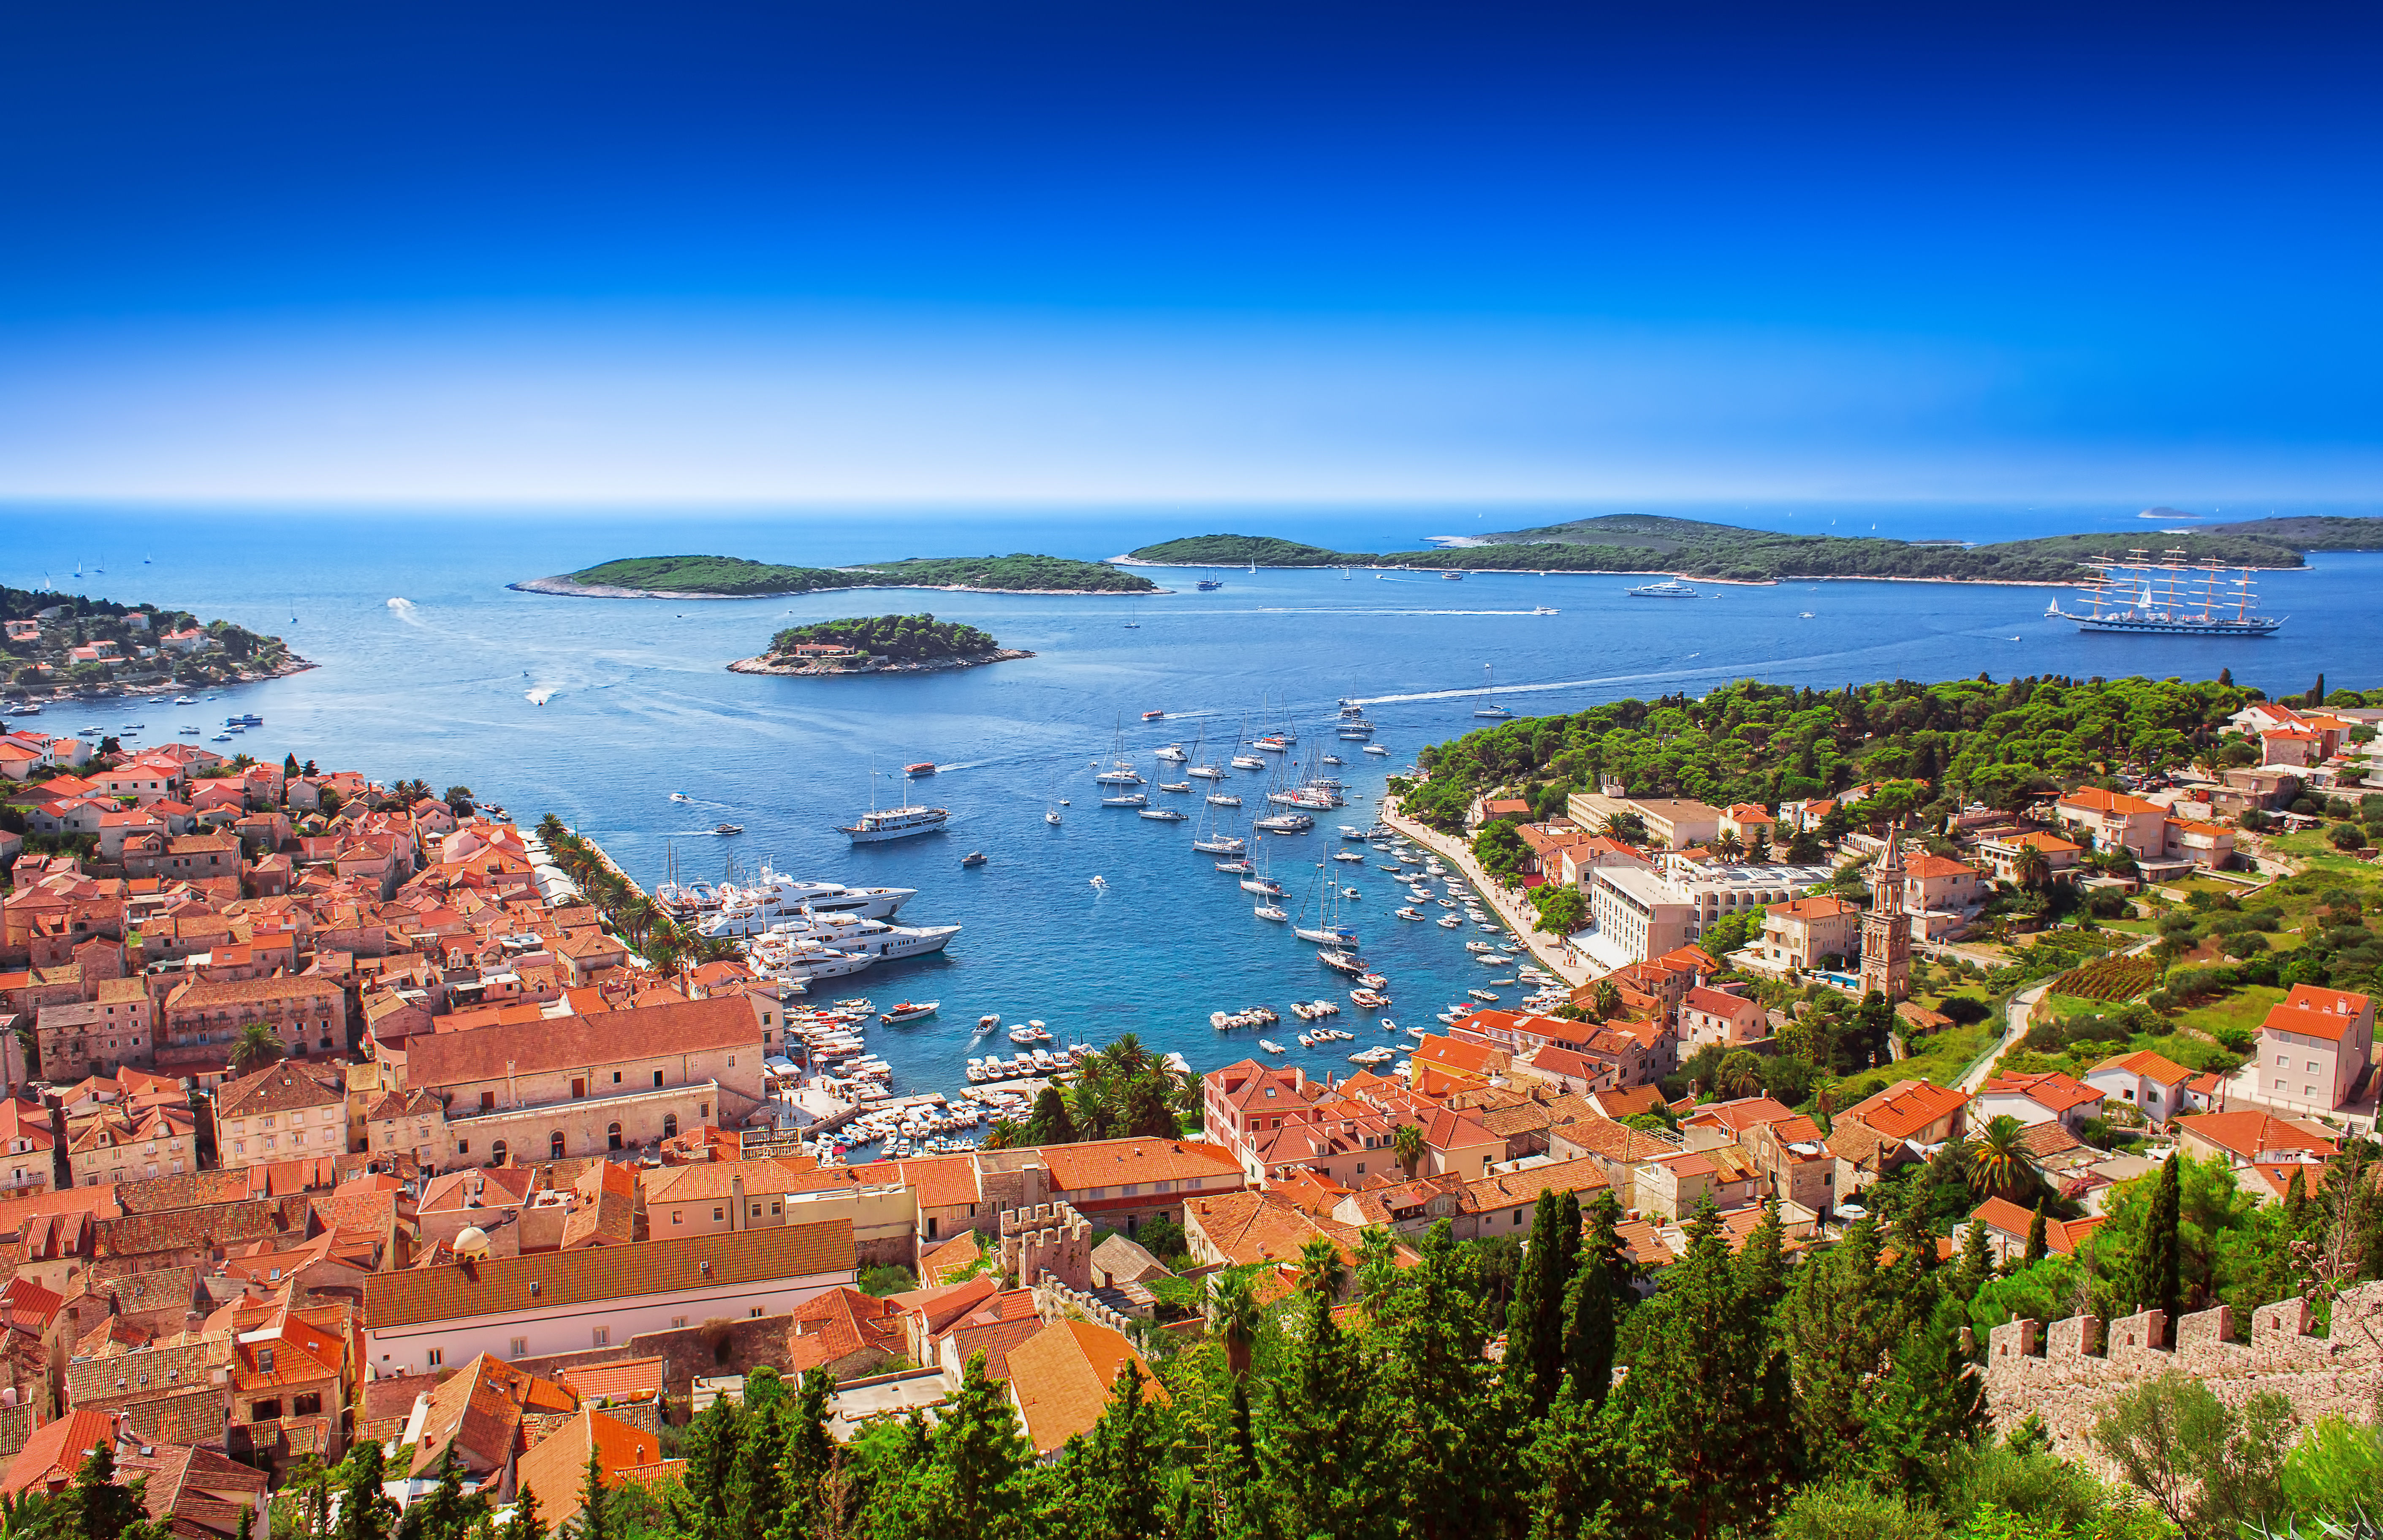 Aerial view of the marina at the heart of Hvar, Croatia